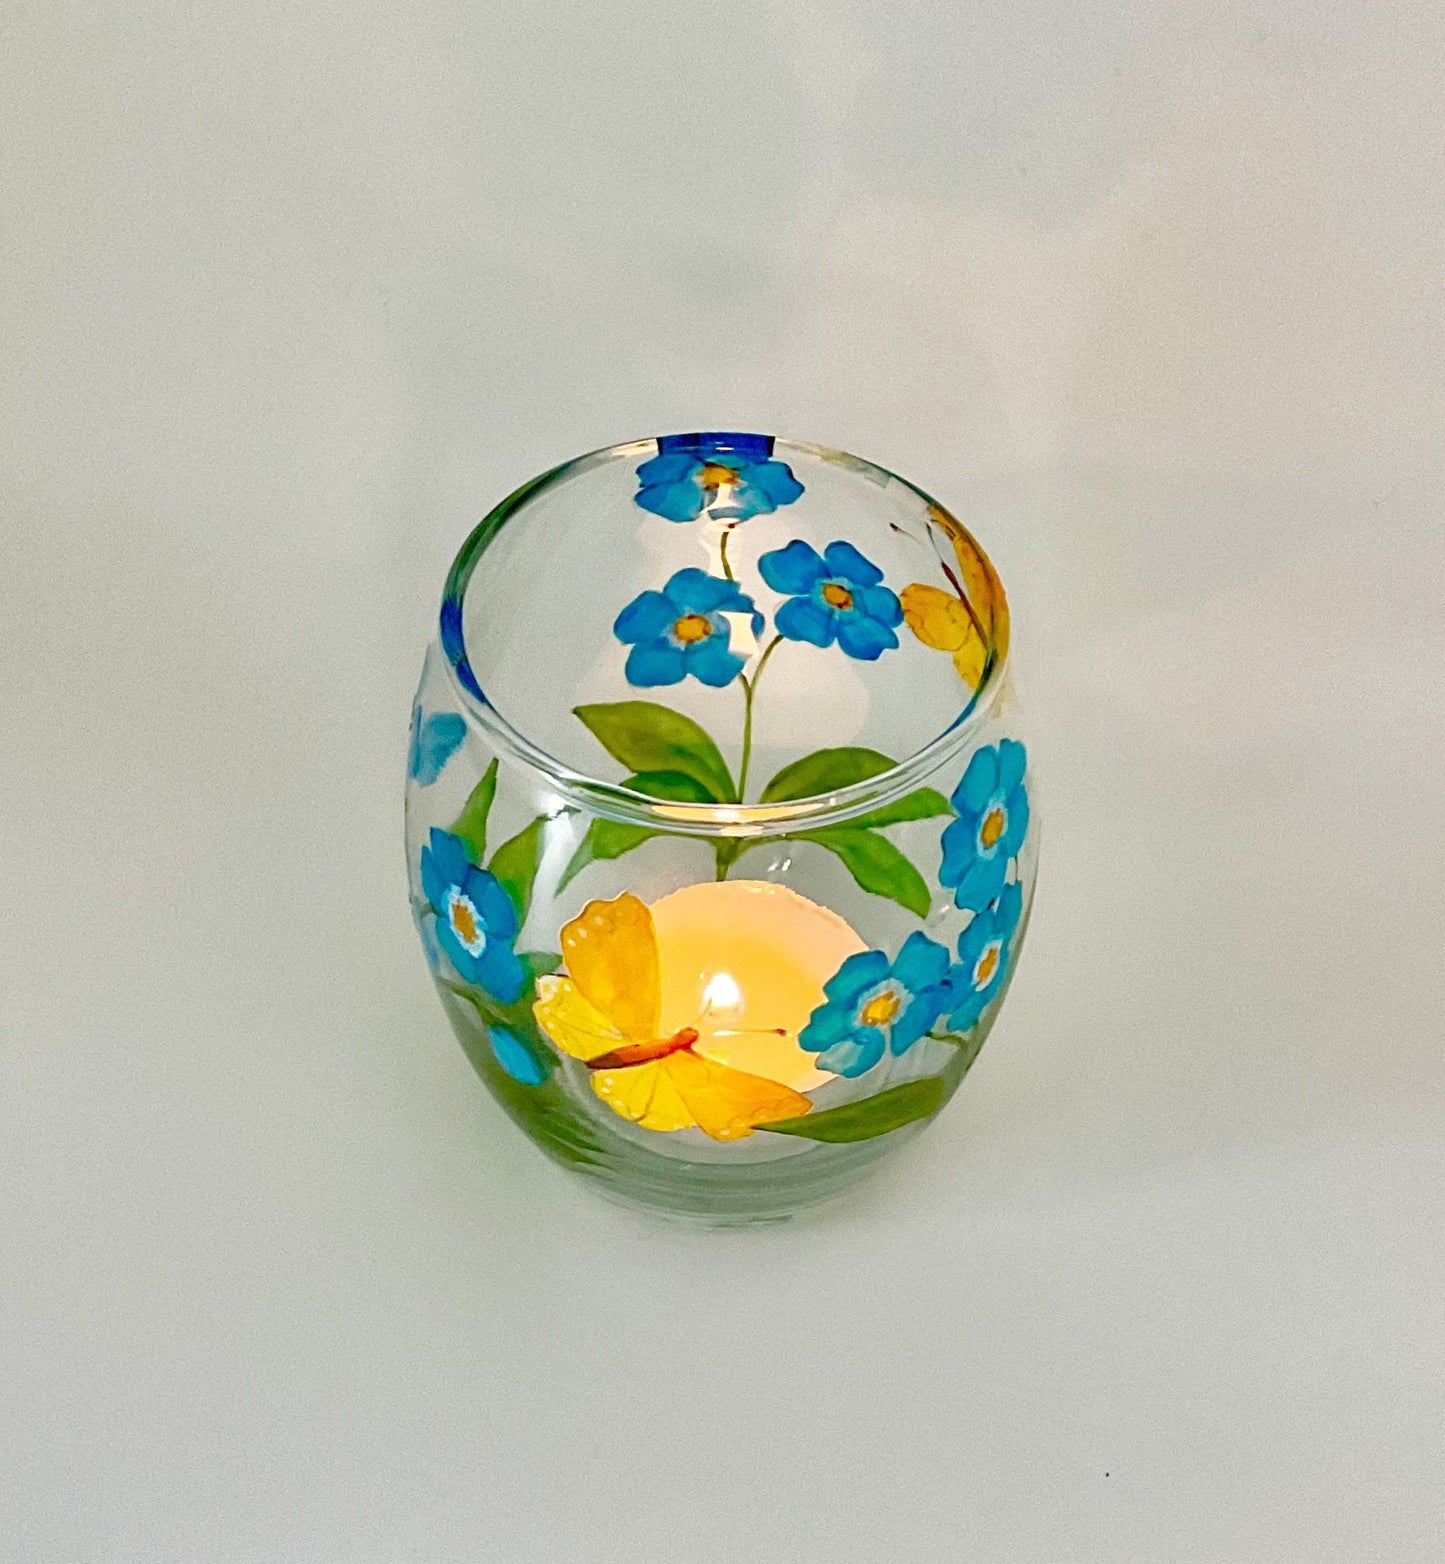 Forget-me-nots and butterfly design votive/candle holder